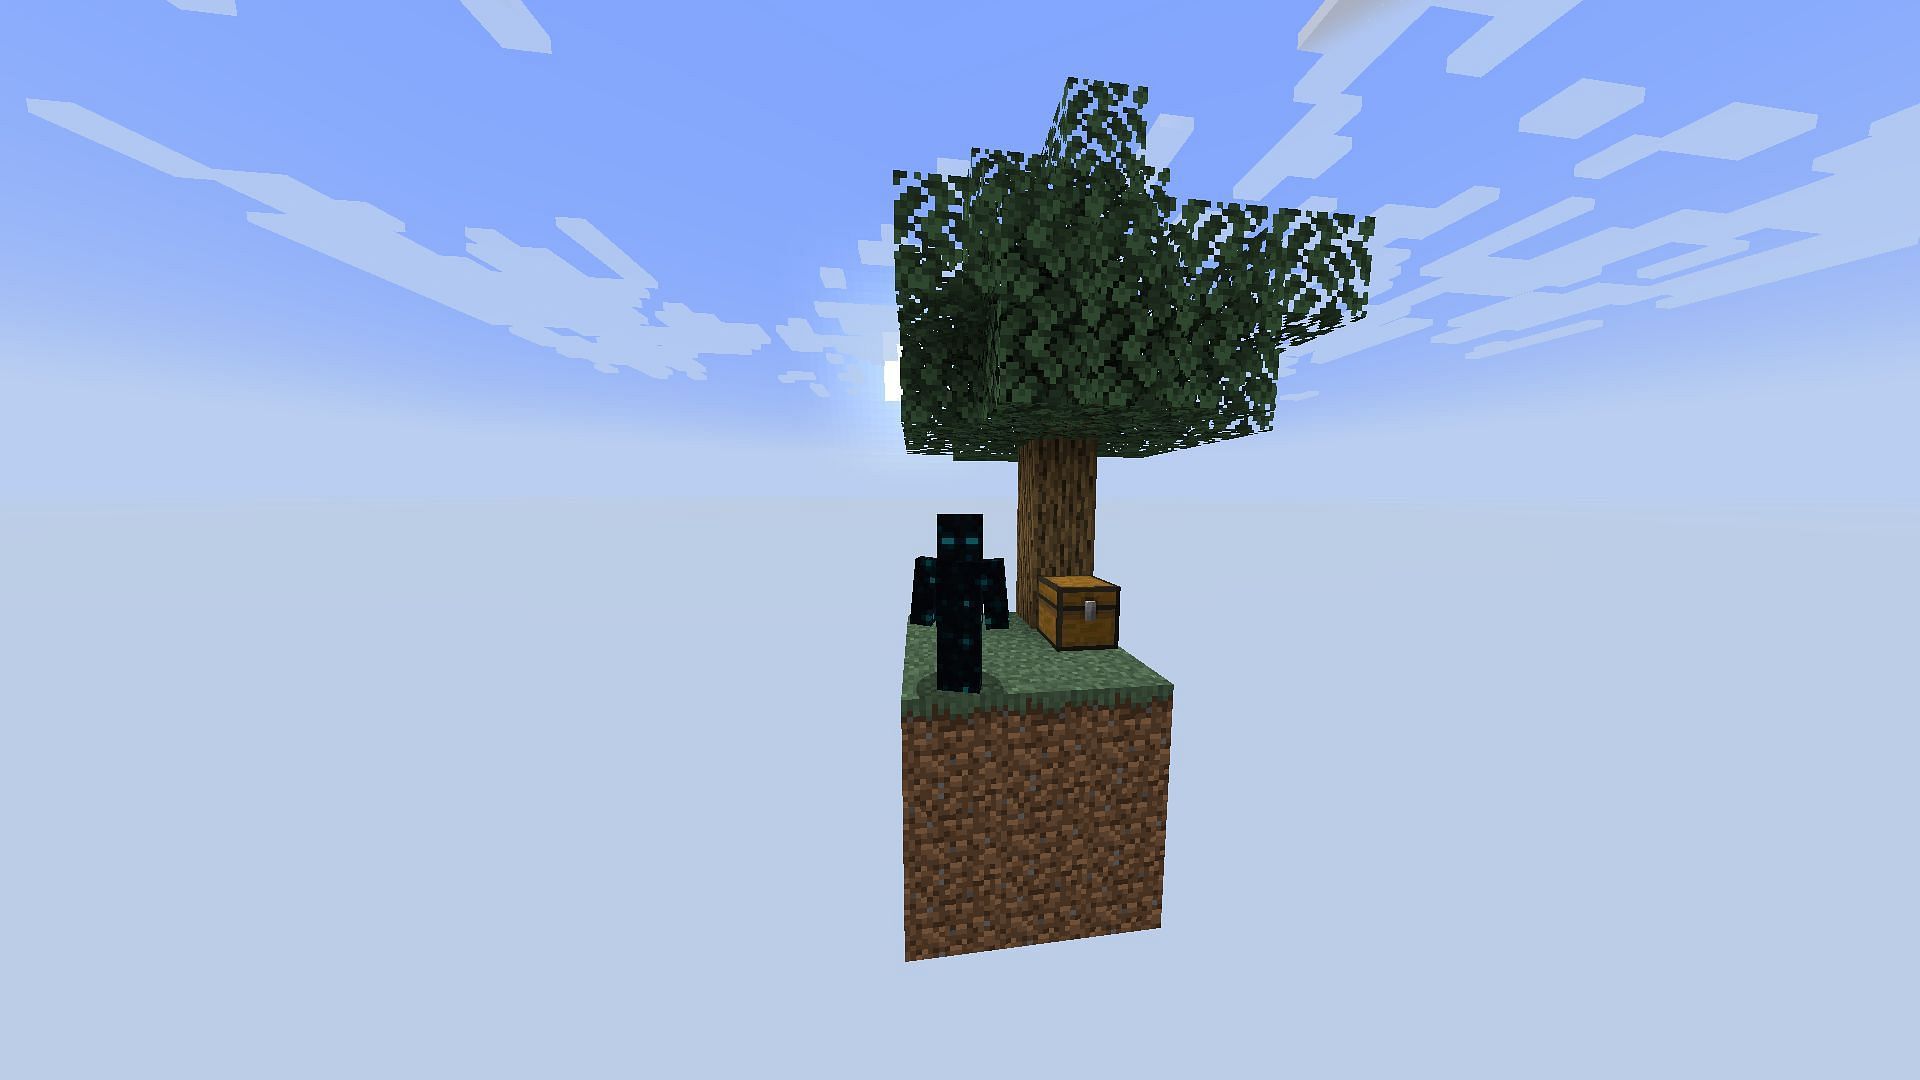 Skyblock is one of the most difficult custom gamemodes in Minecraft (Image via Mojang)